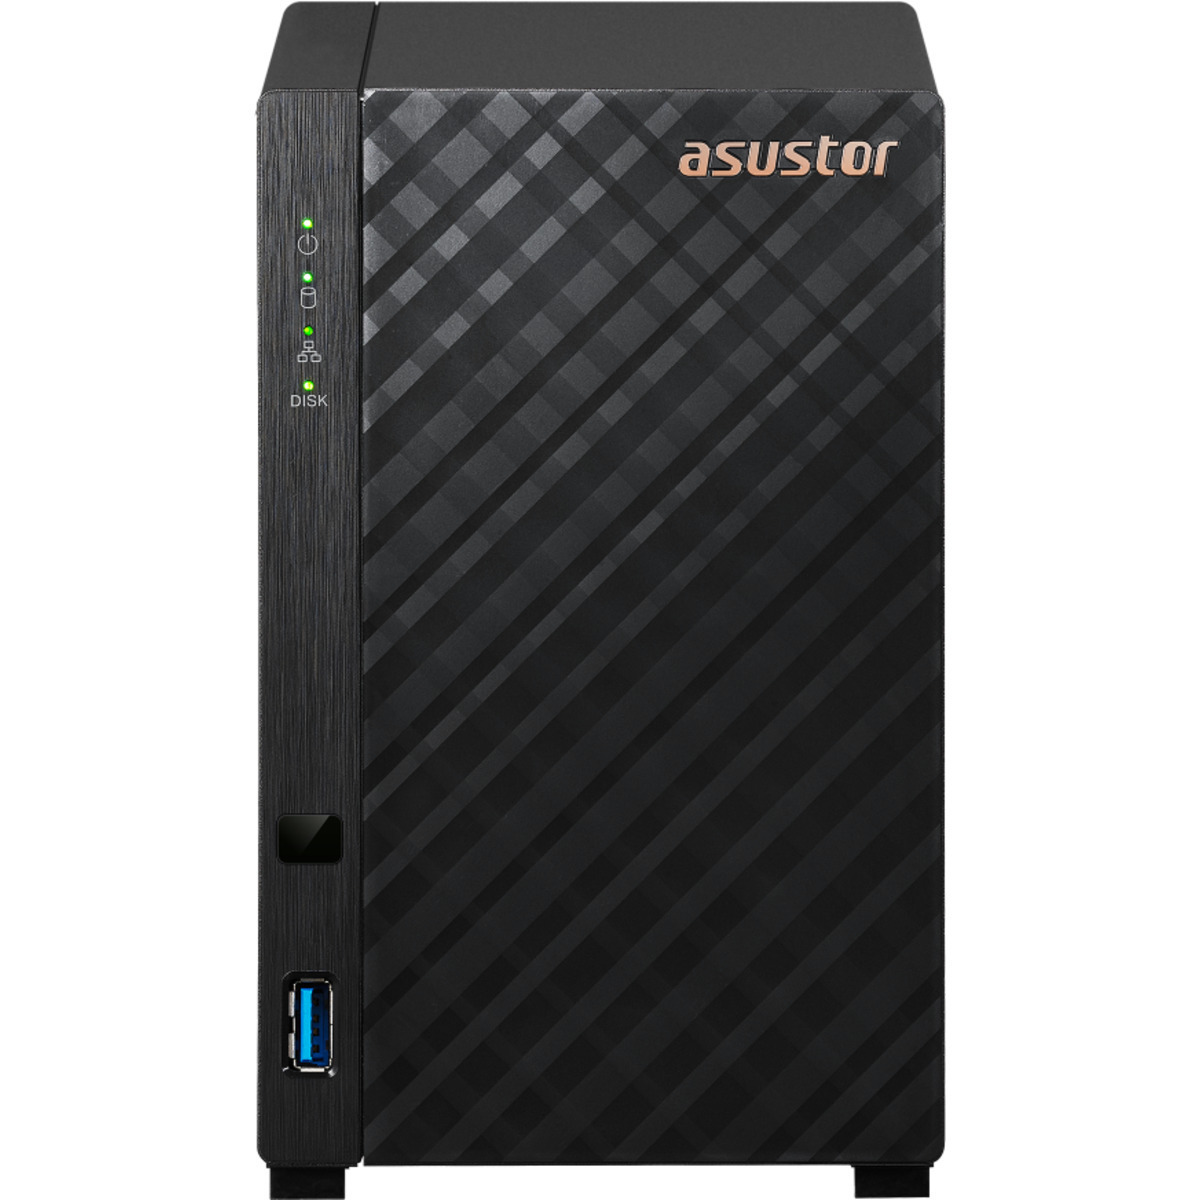 buy $384 ASUSTOR DRIVESTOR 2 AS1102T 1tb Desktop NAS - Network Attached Storage Device 2x500gb Crucial MX500 CT500MX500SSD1 2.5 560/510MB/s SATA 6Gb/s SSD CONSUMER Class Drives Installed - Burn-In Tested - nas headquarters buy network attached storage server device das new raid-5 free shipping usa DRIVESTOR 2 AS1102T